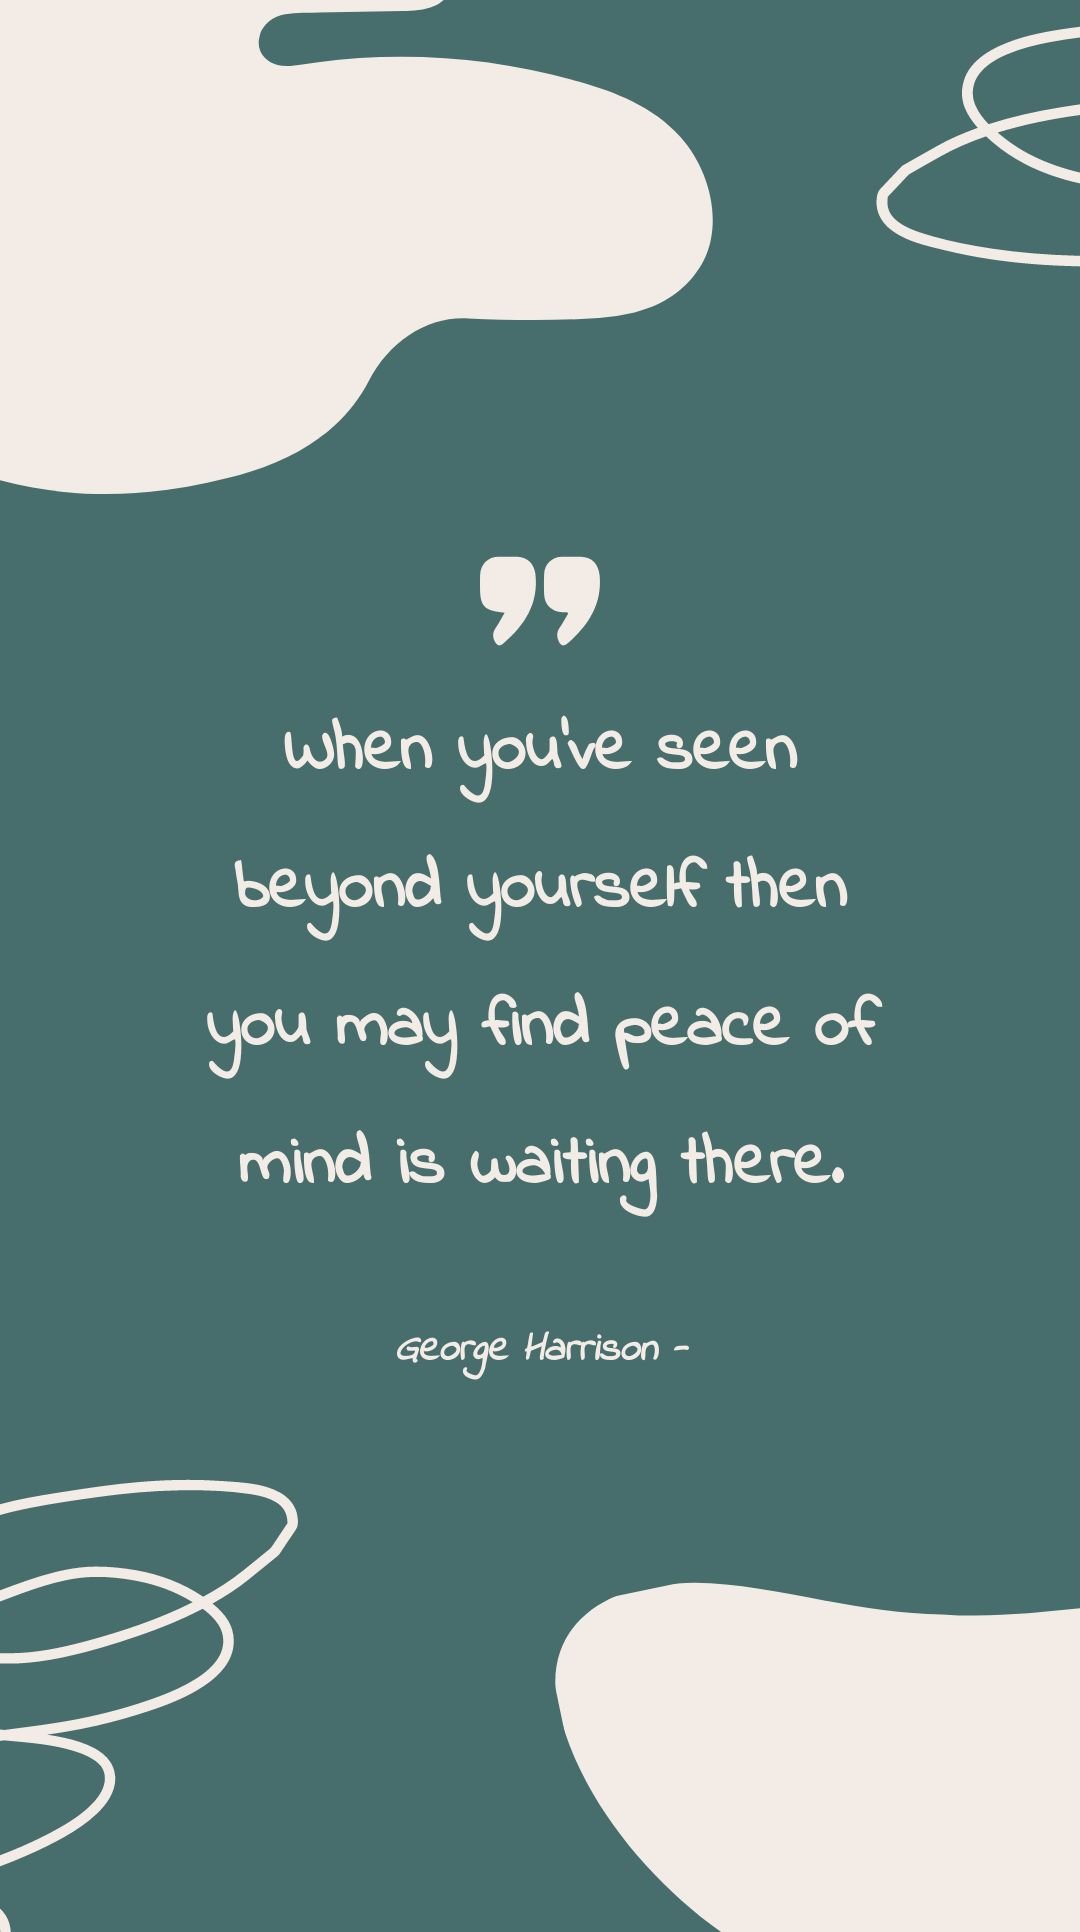 George Harrison - When you’ve seen beyond yourself then you may find peace of mind is waiting there.